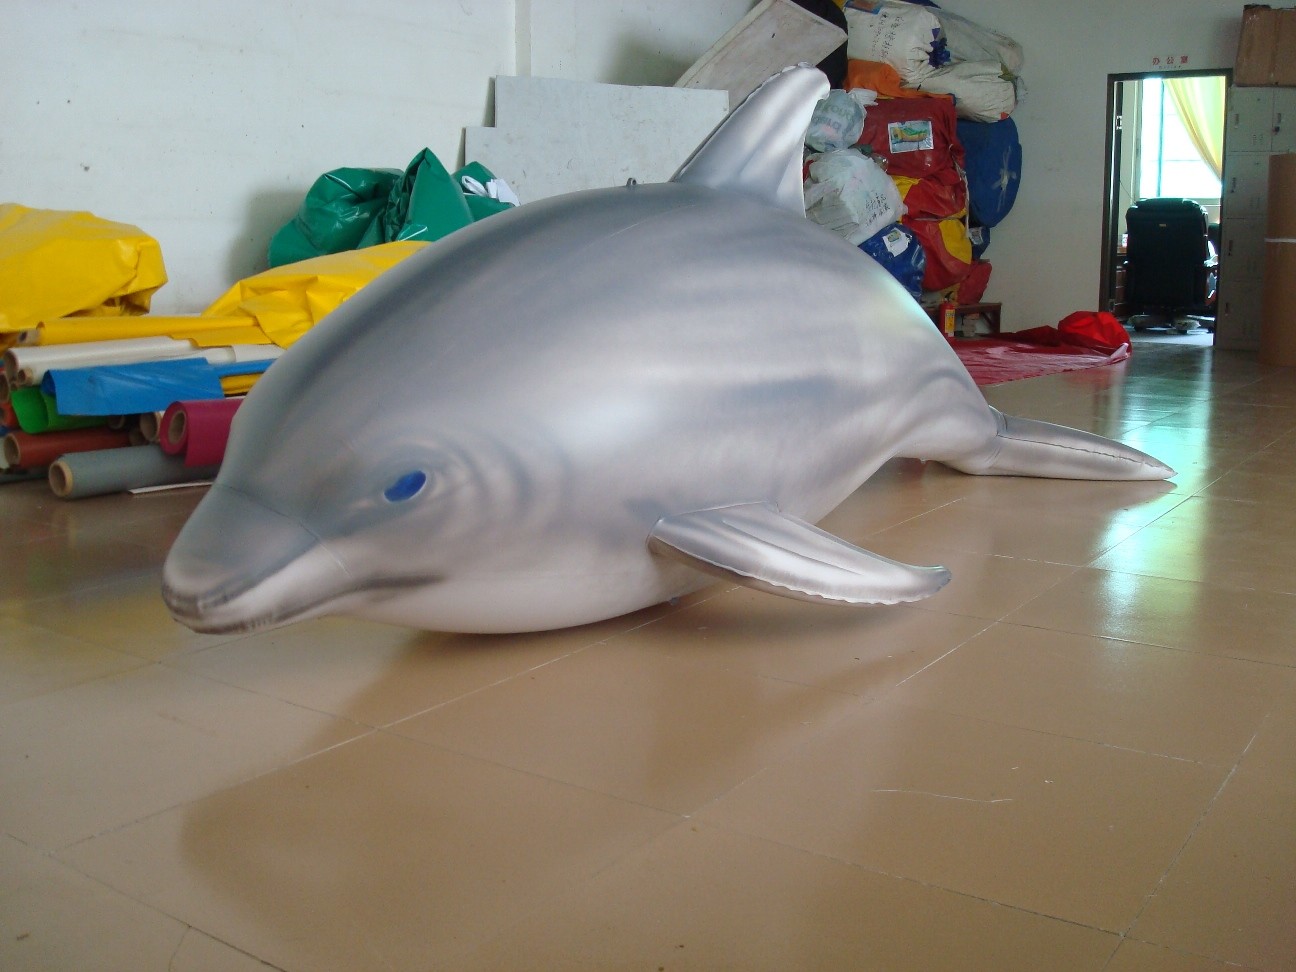  1.5m Long Airtight Dolphin Shaped Swimming Pool Toy Display In Showroom Manufactures